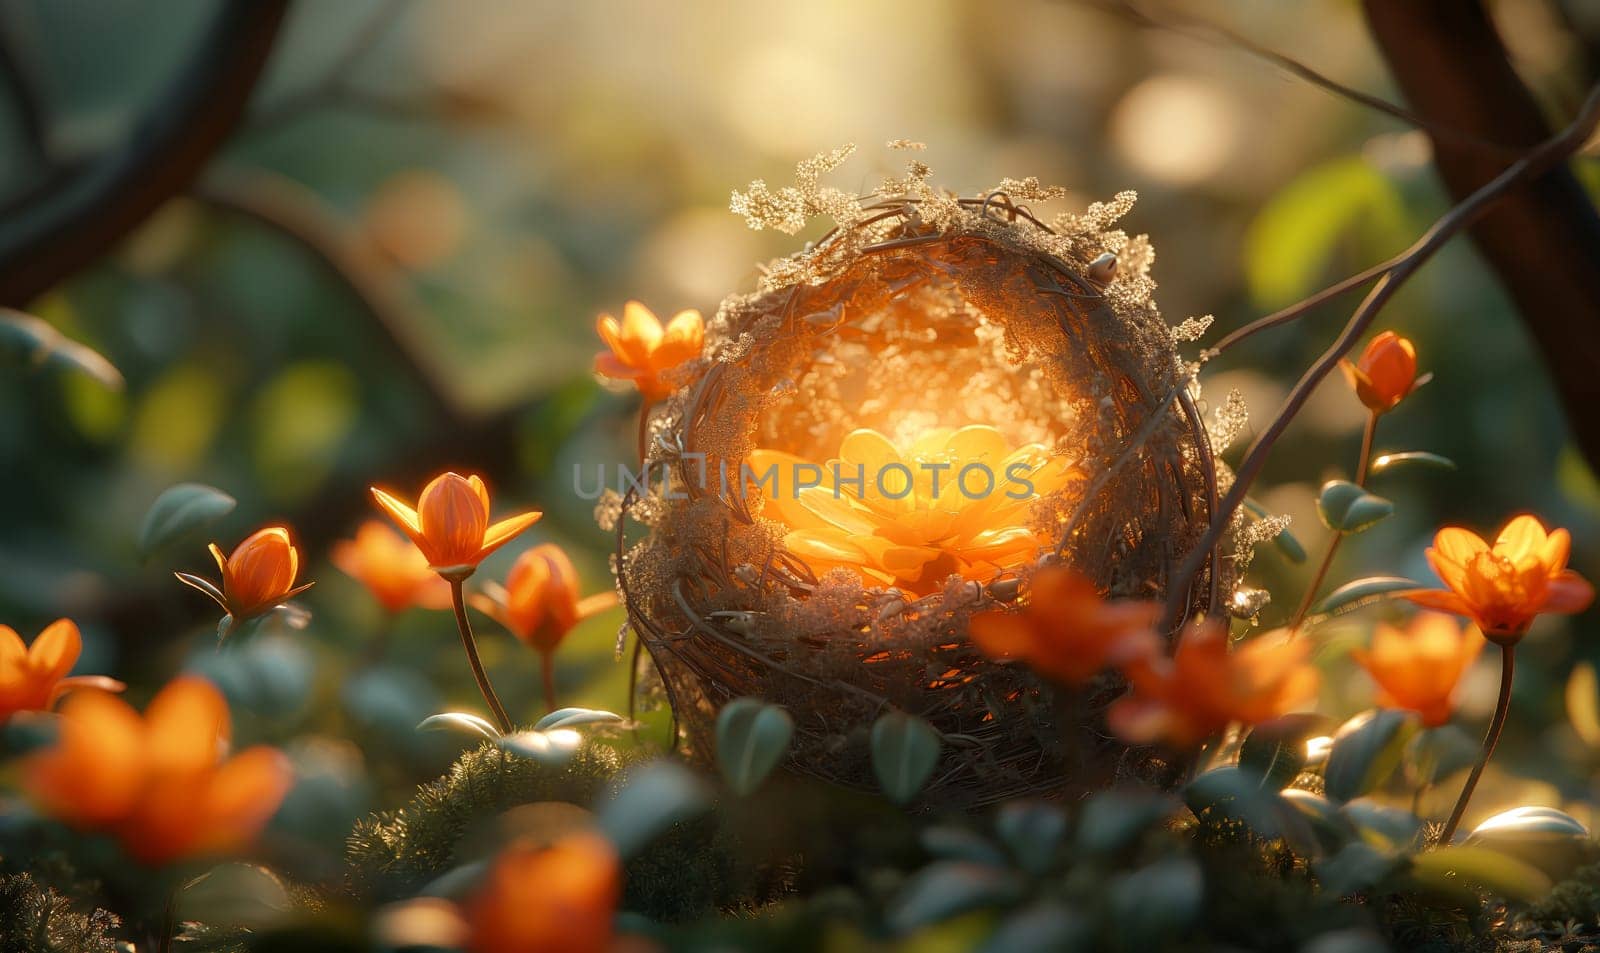 A birds nest is seen up close in a vibrant field of flowers.